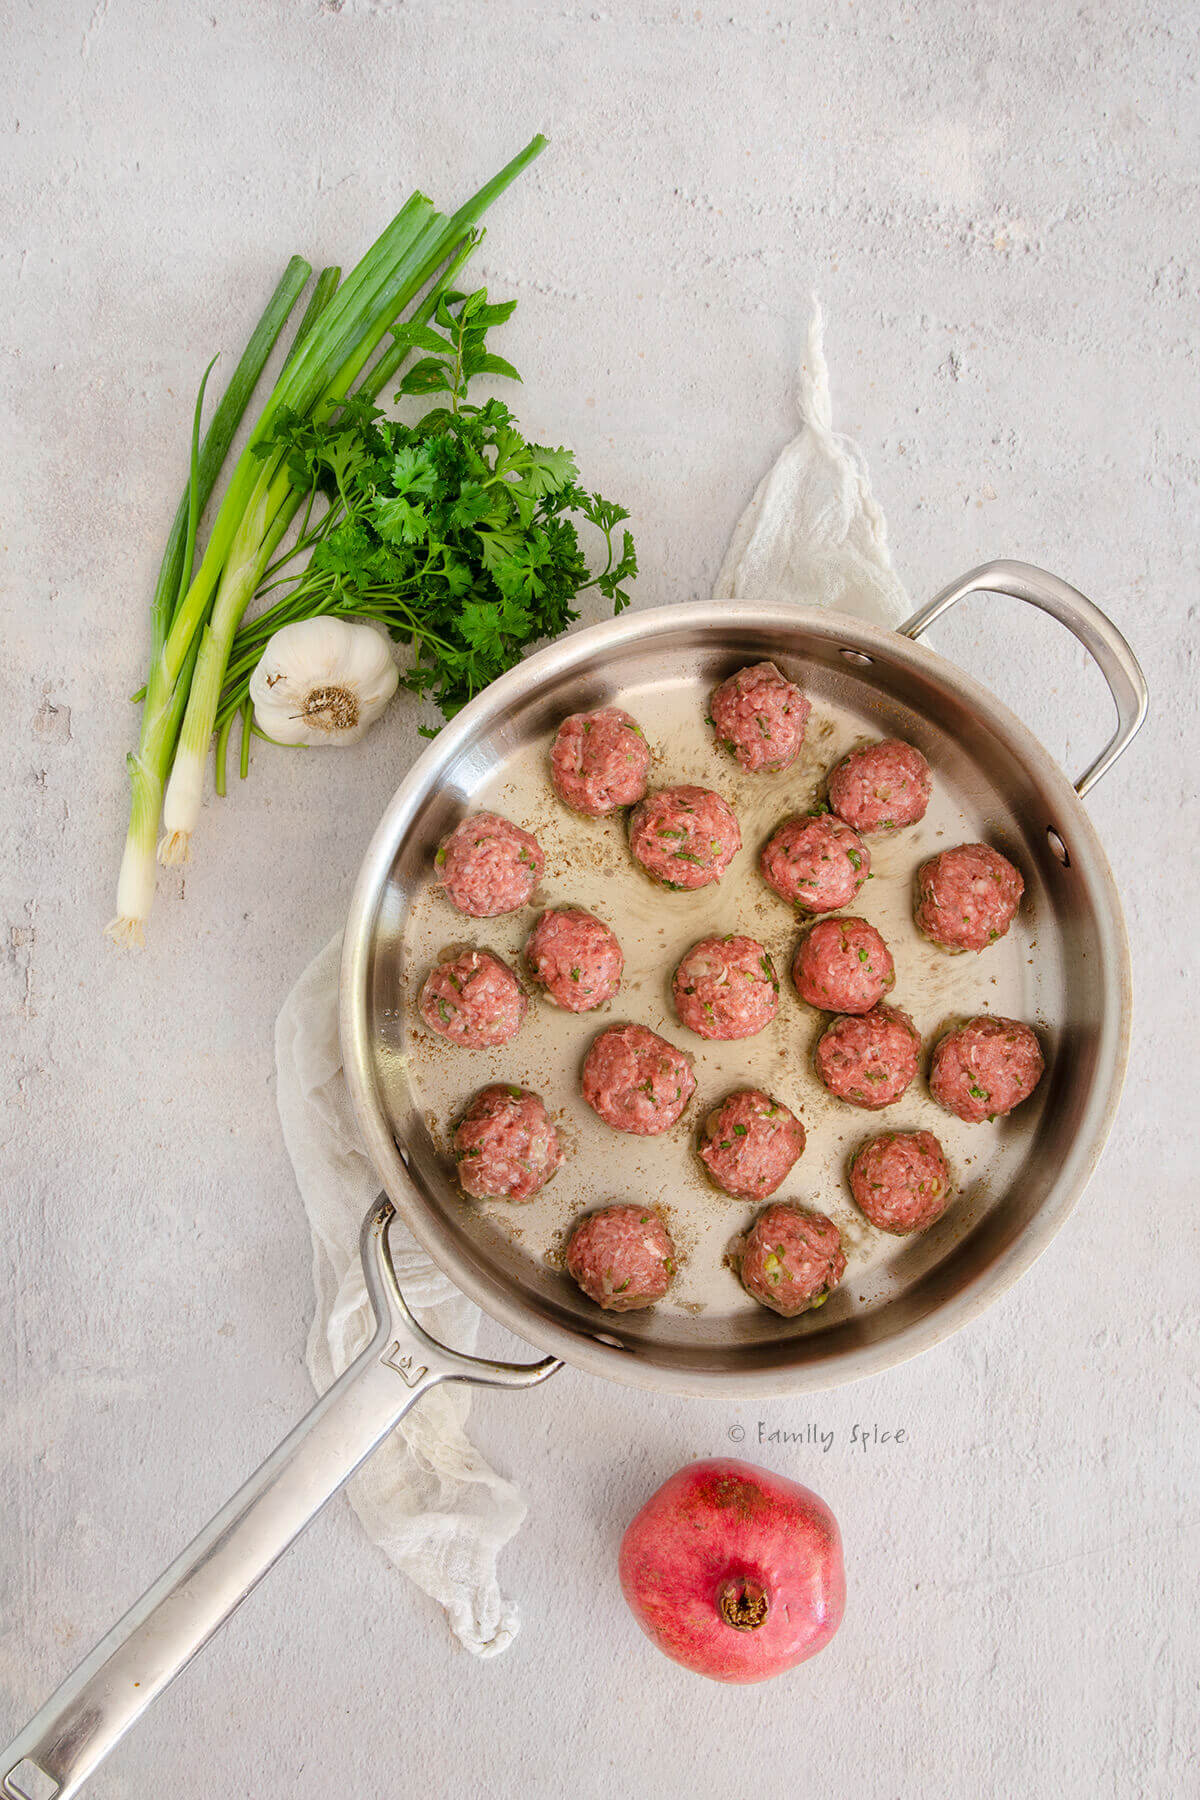 Browning lamb meatballs in a stainless frying pan with fresh herbs and garlic next to it